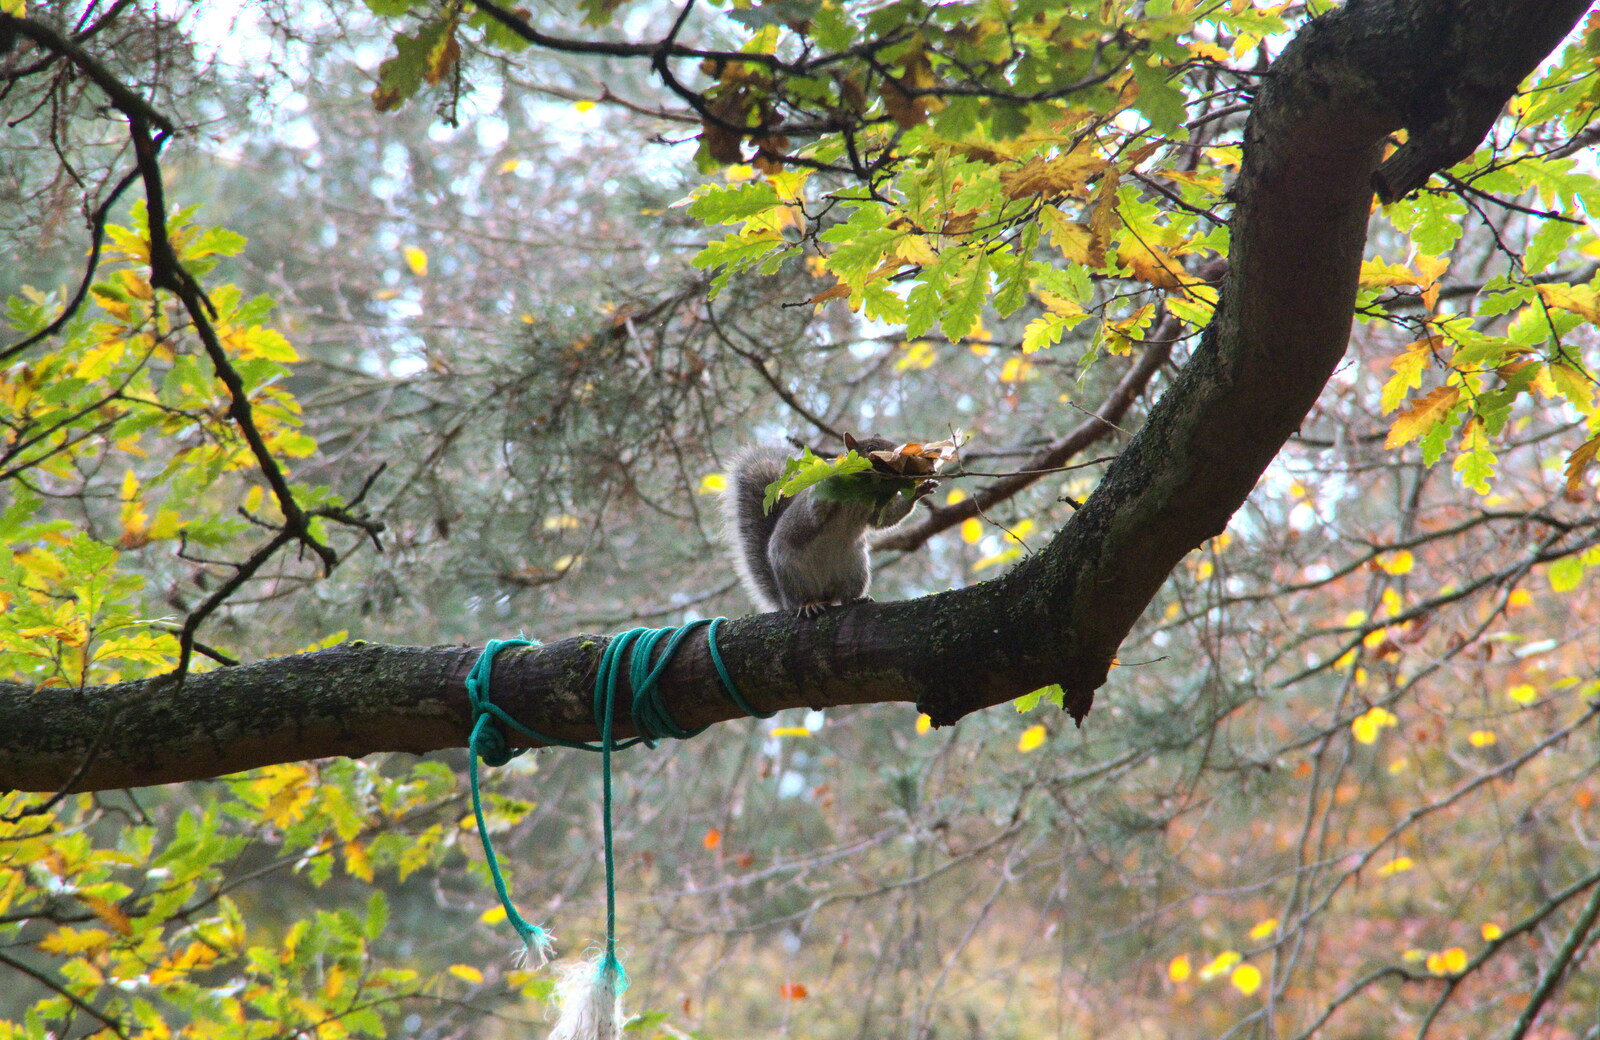 A squirrel collects leaves from A Trip to Sandringham Estate, Norfolk - 31st October 2020